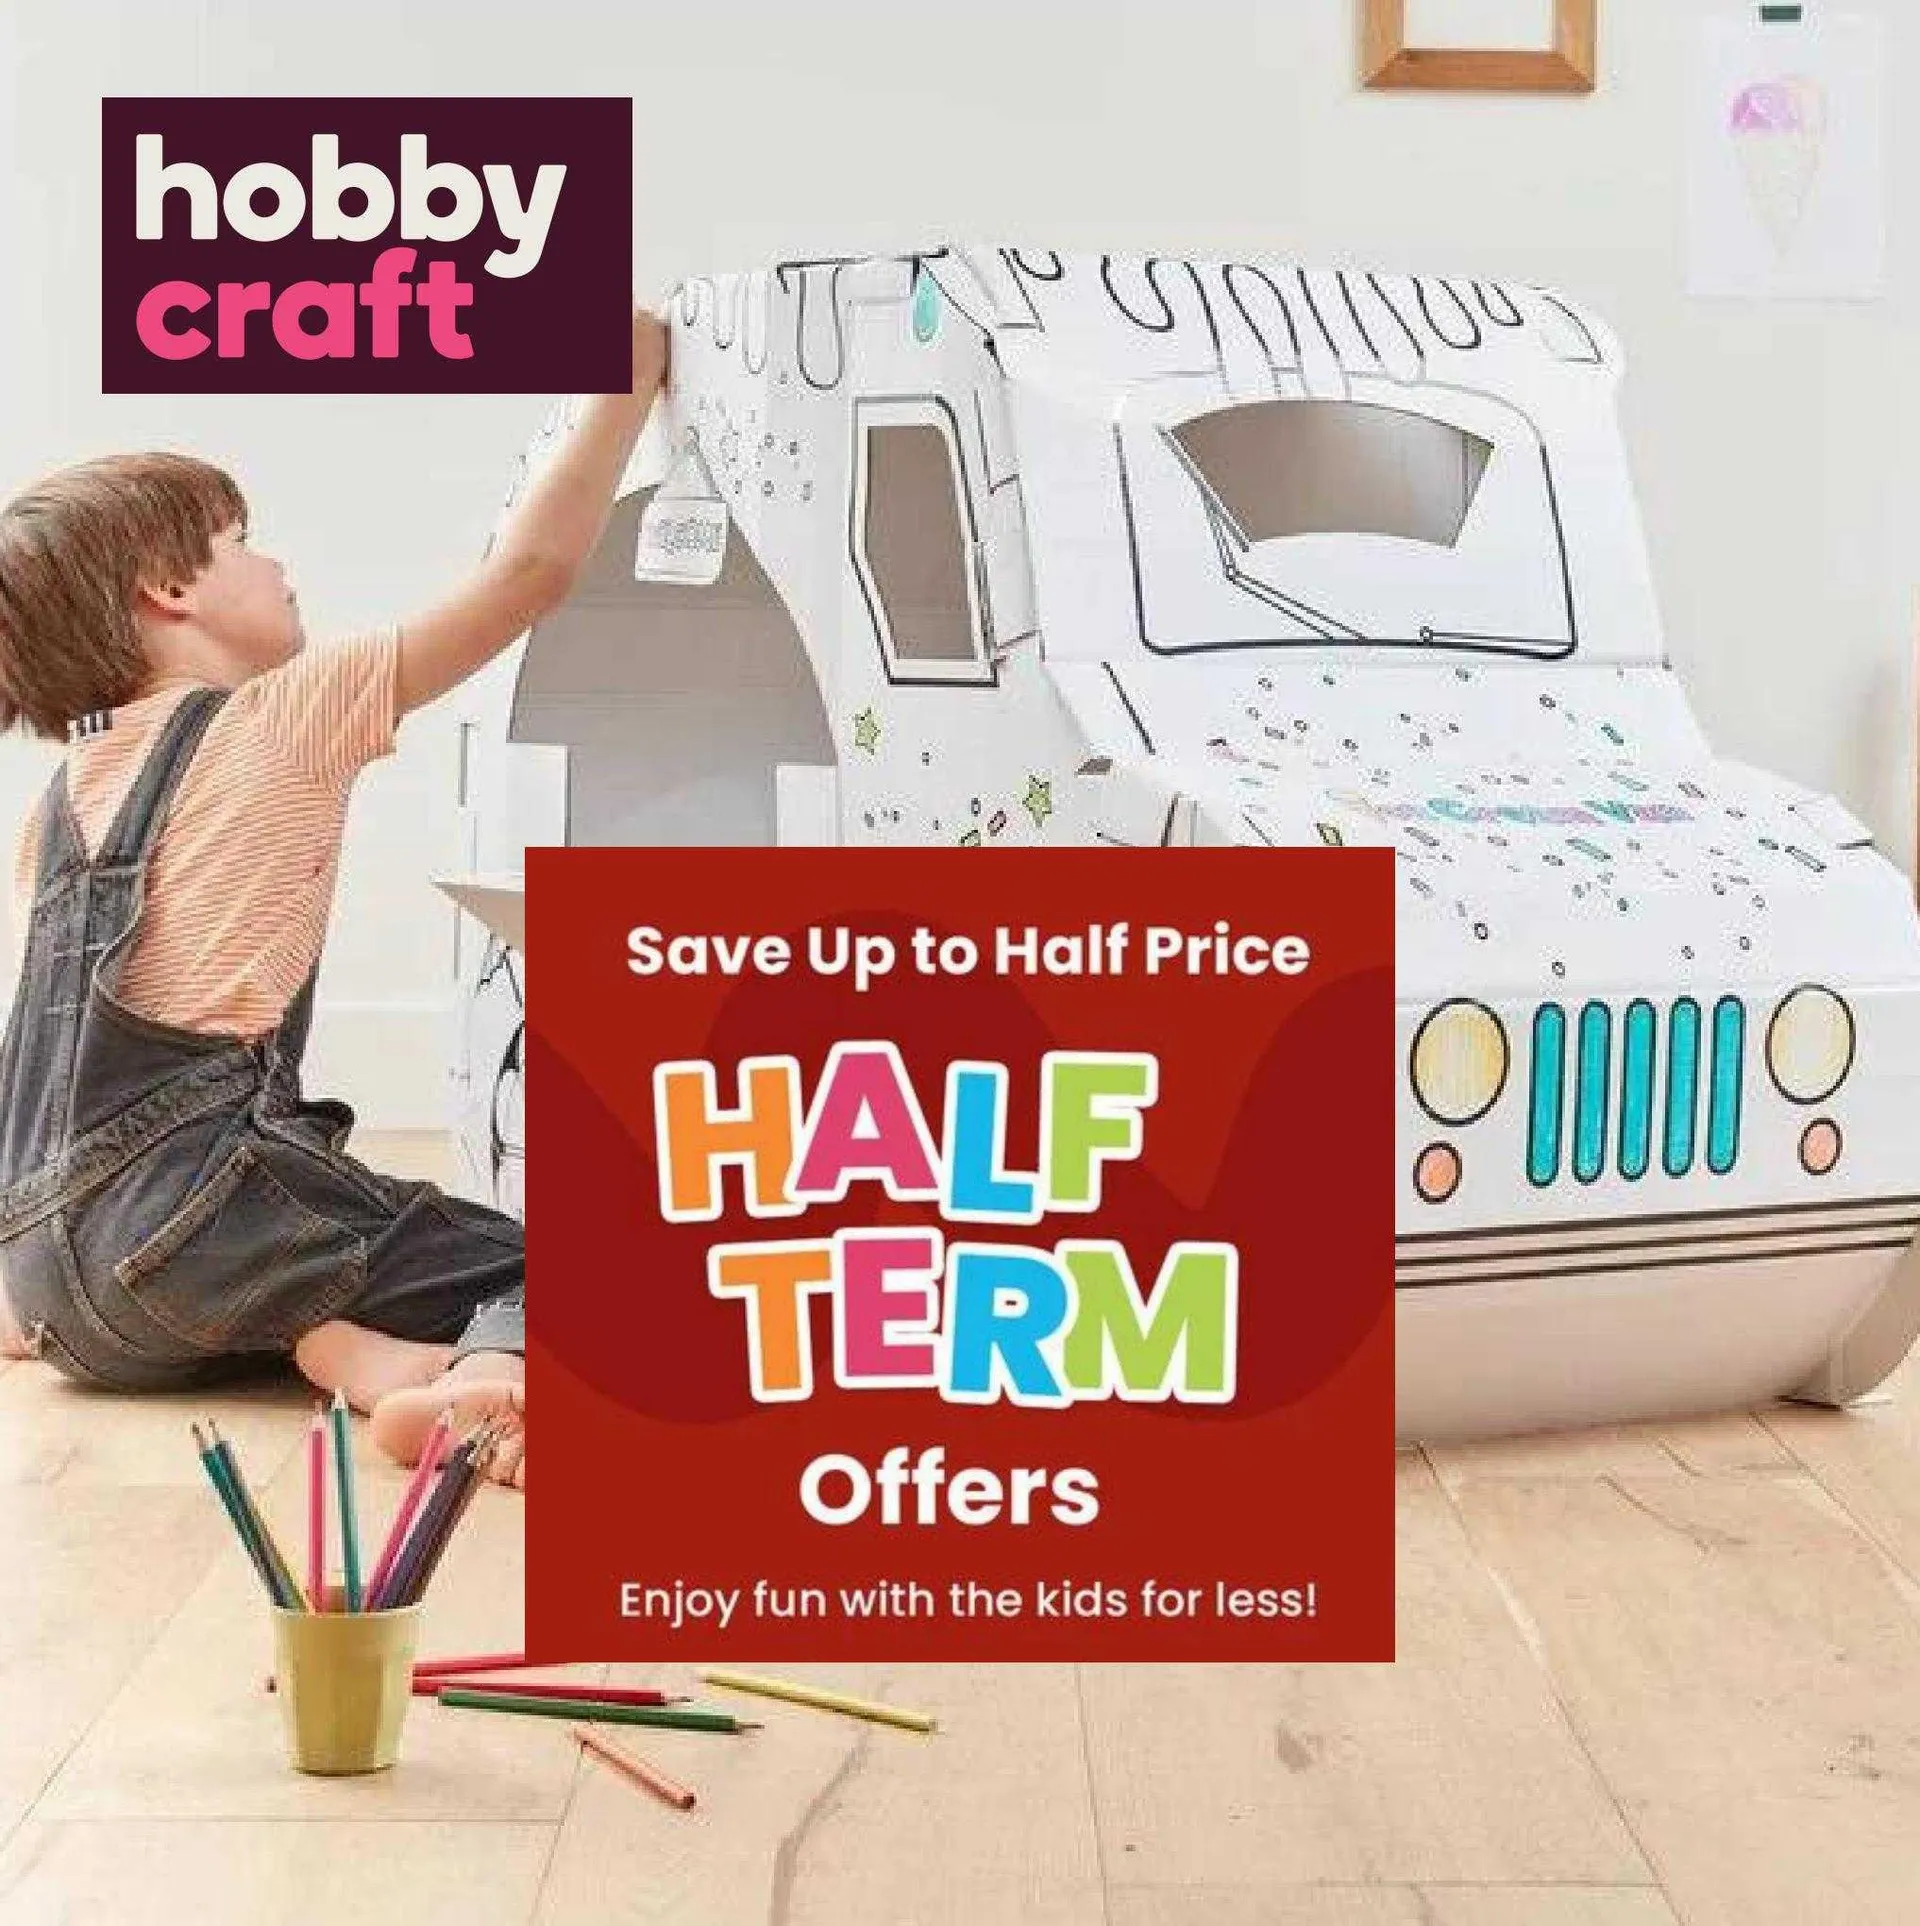 Hobbycraft Weekly Offers - 1